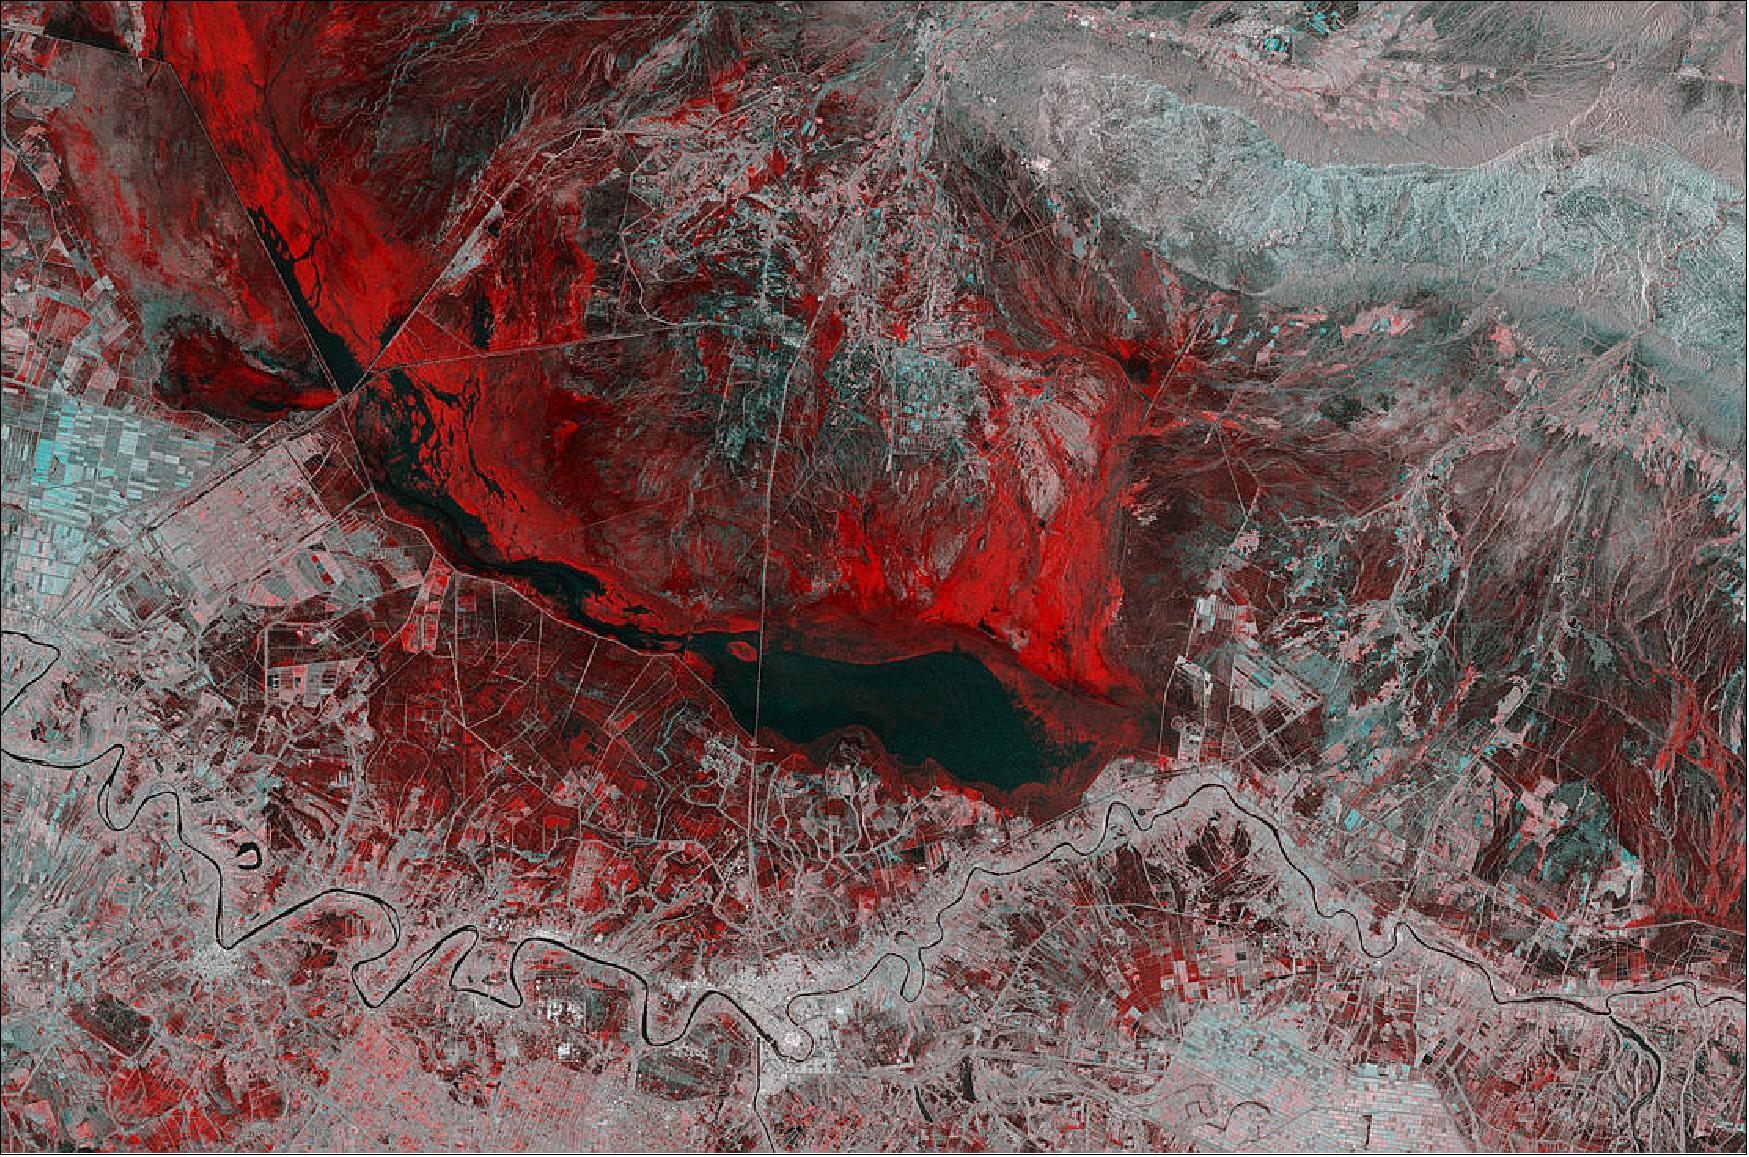 Figure 35: This Copernicus Sentinel-1 image combines two acquisitions over the same area of eastern Iraq, one from 14 November 2018 before heavy rains fell and one from 26 November 2018 after the storms. The image reveals the extent of flash flooding in red, near the town of Kut. This image is also featured on the Earth from Space video program (image credit: ESA, the image contains modified Copernicus Sentinel data (2018), processed by ESA, CC BY-SA 3.0 IGO)